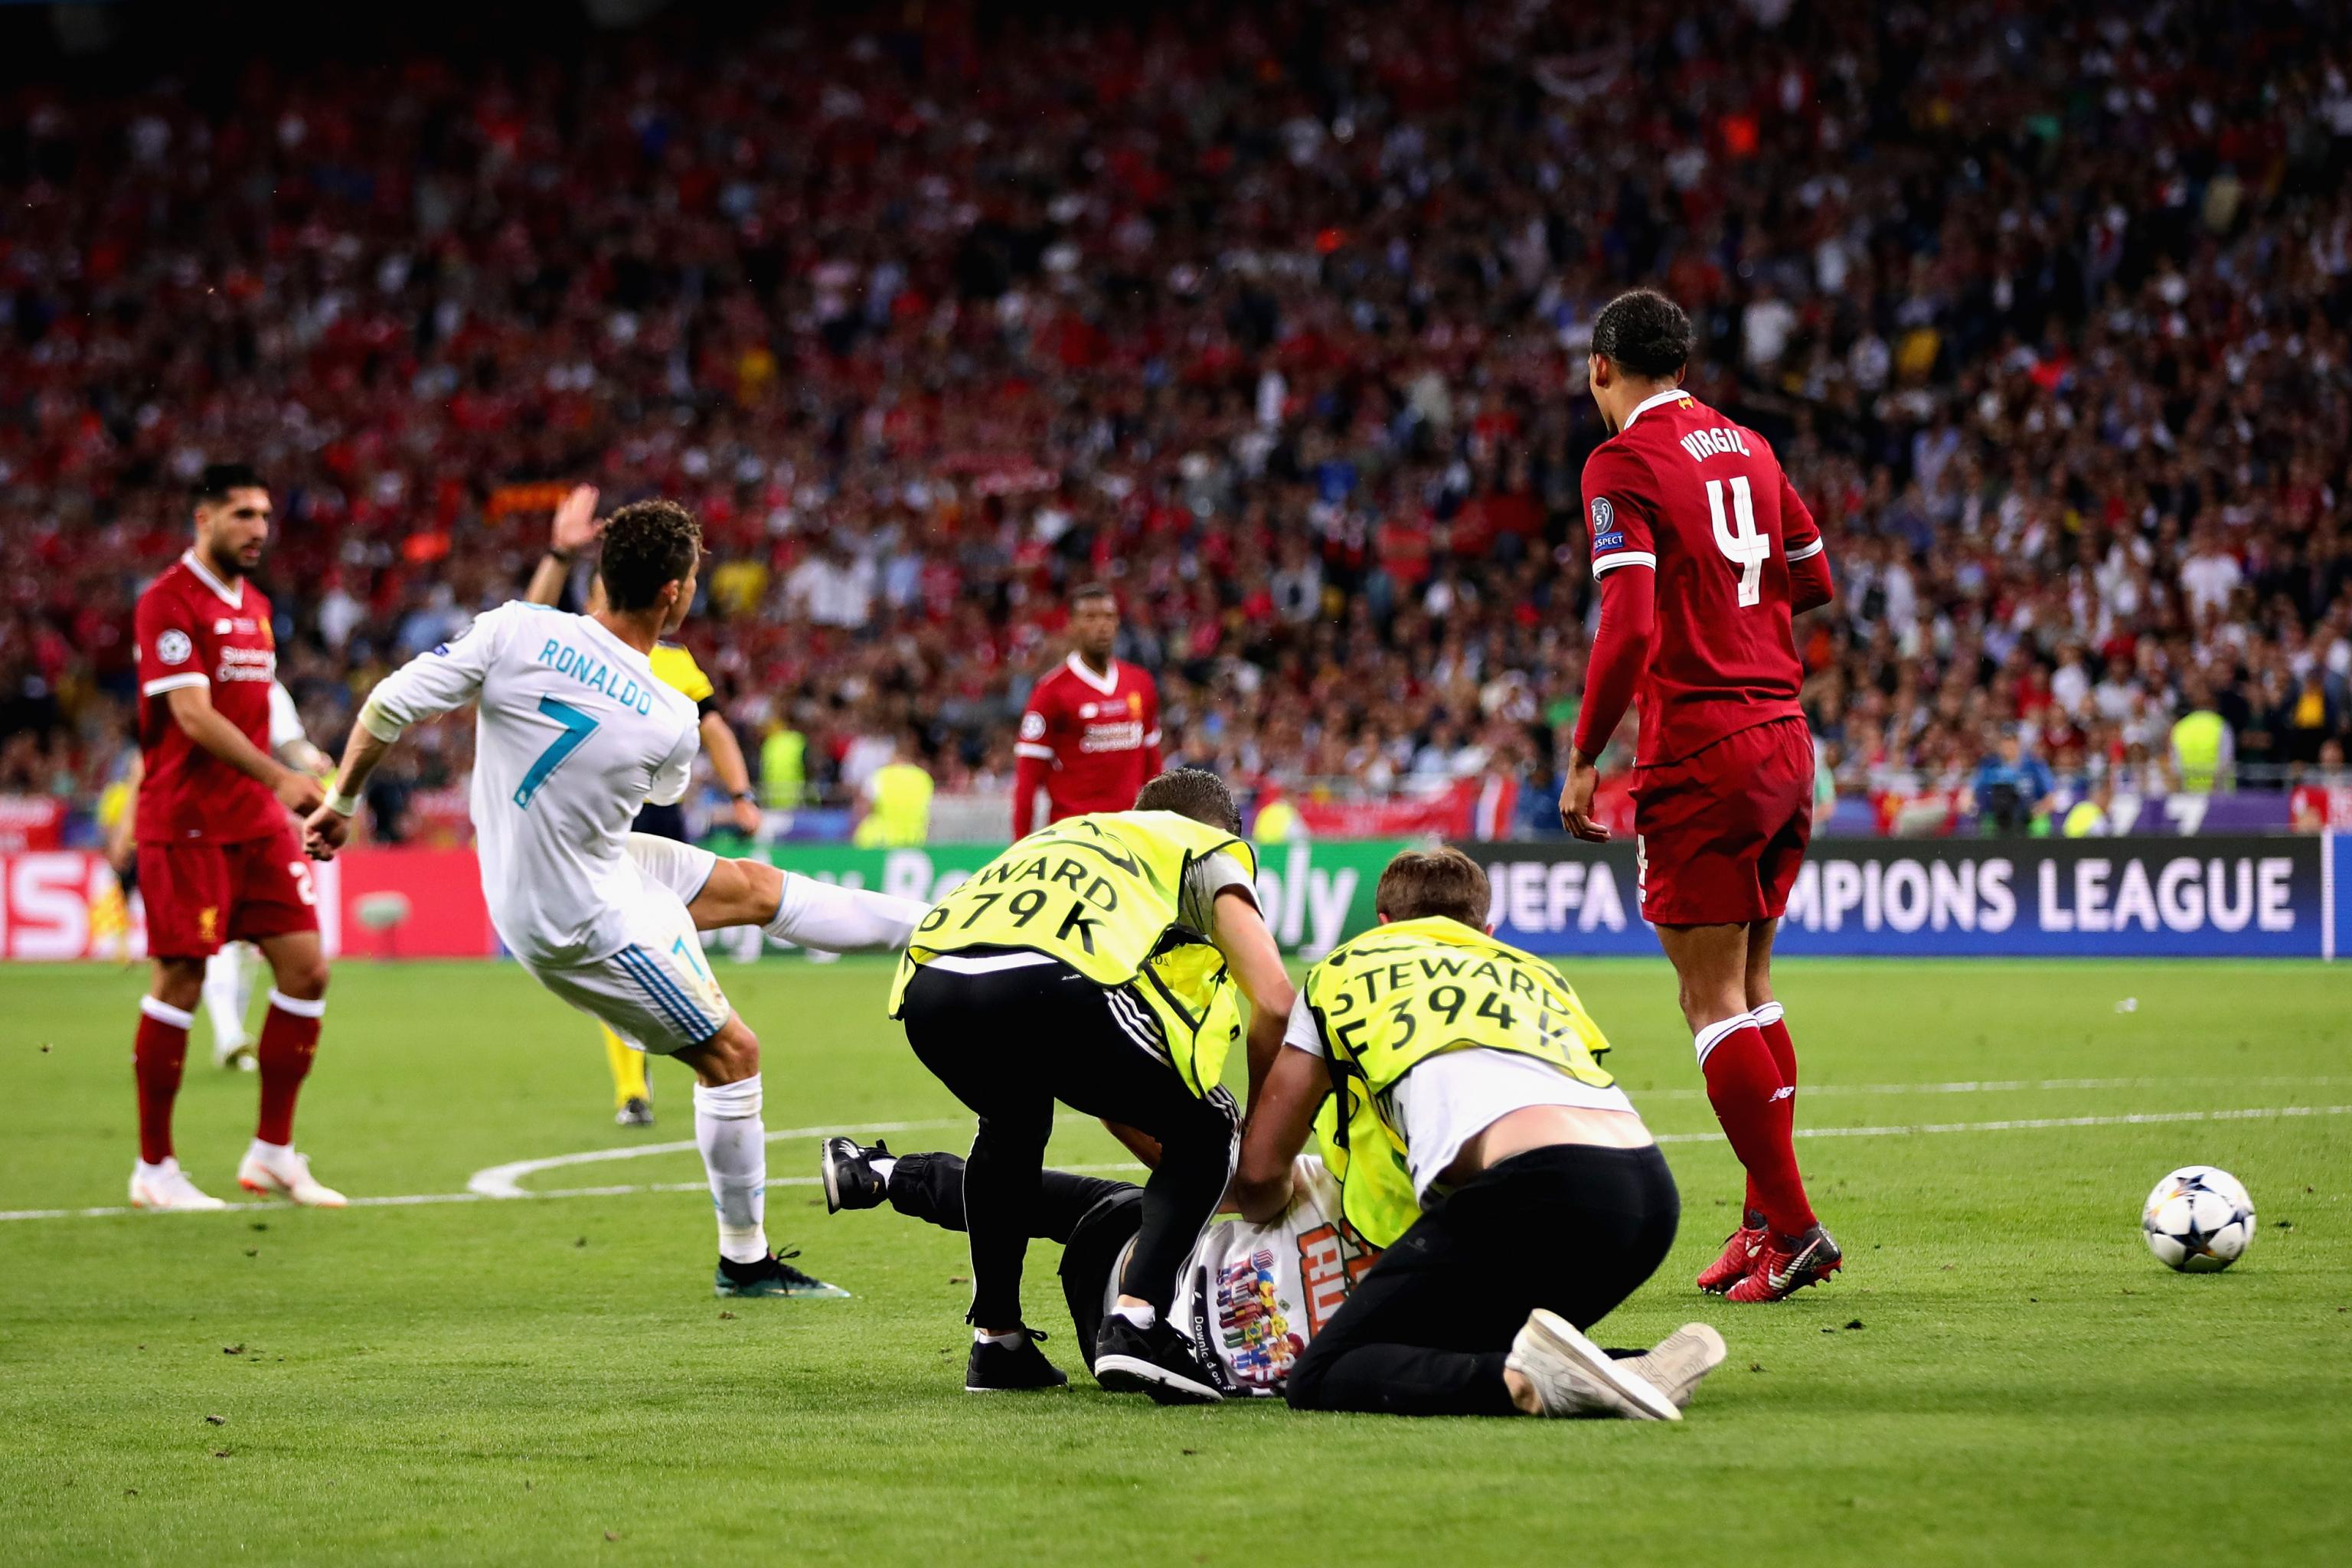 Cristiano Ronaldo 2018 Ucl Final Goal Chance Disrupted As Fan Storms Pitch Bleacher Report Latest News Videos And Highlights